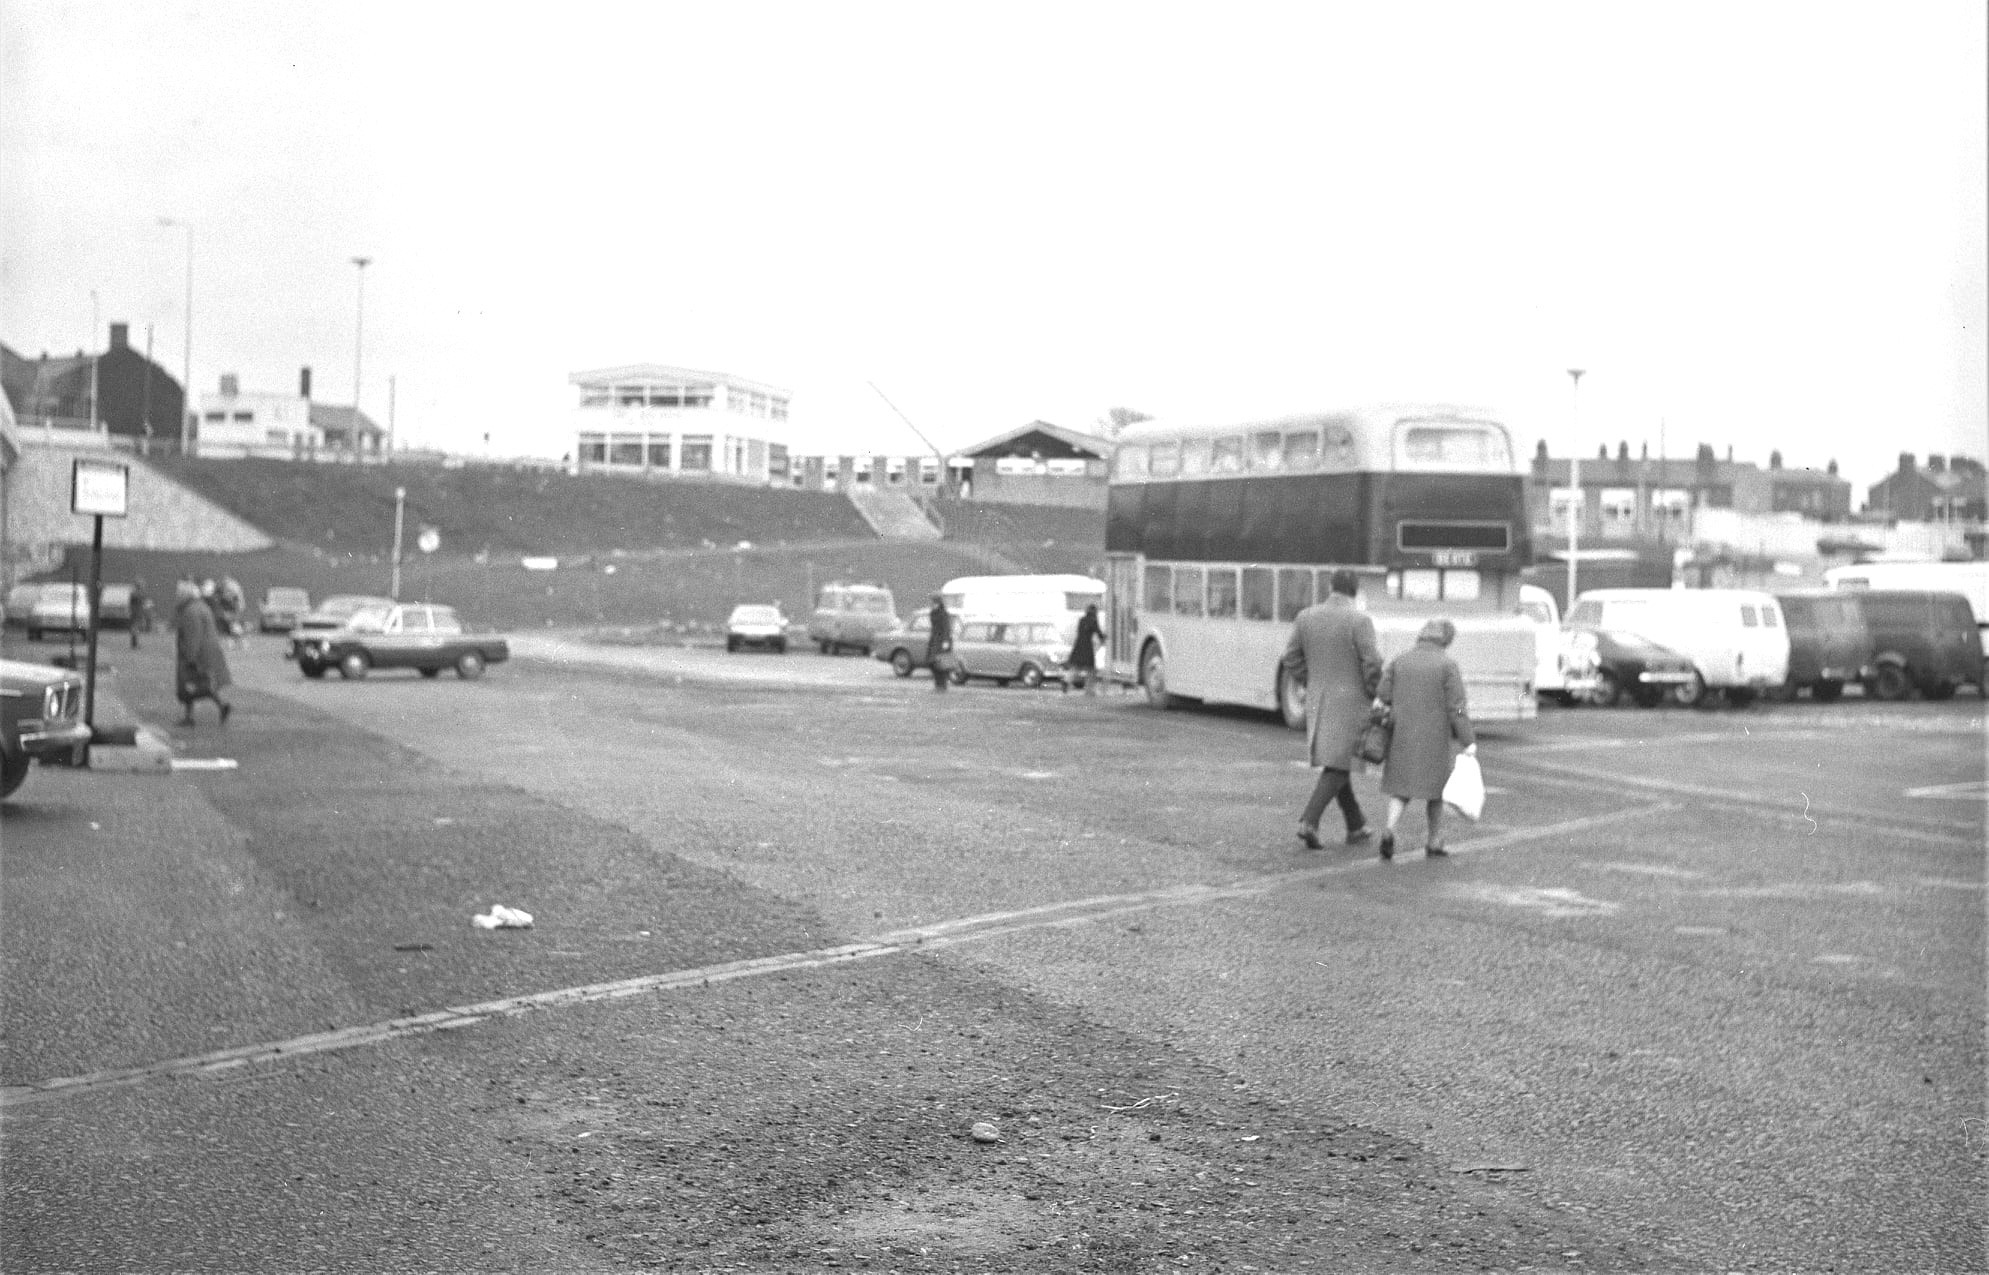 Eagles Meadow flyover, February 1977.